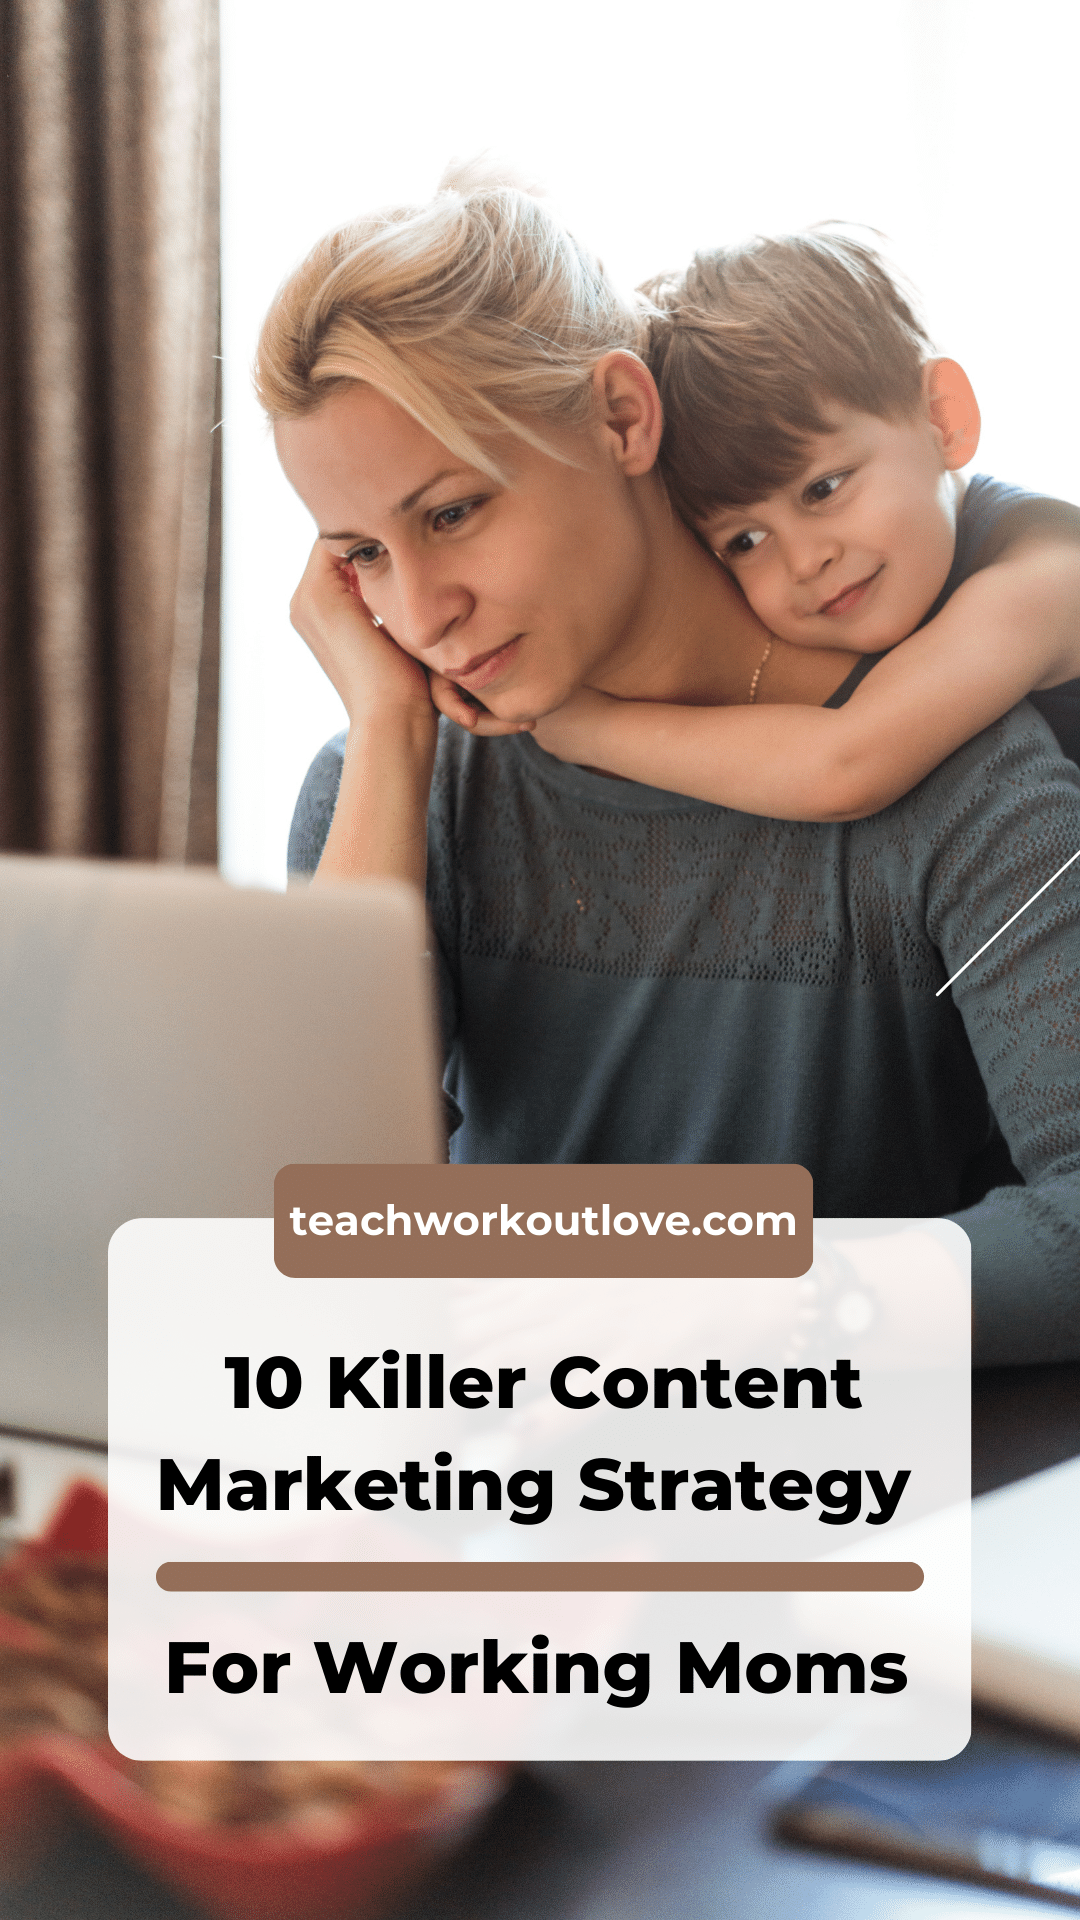 Killer content marketing strategy for Working Moms